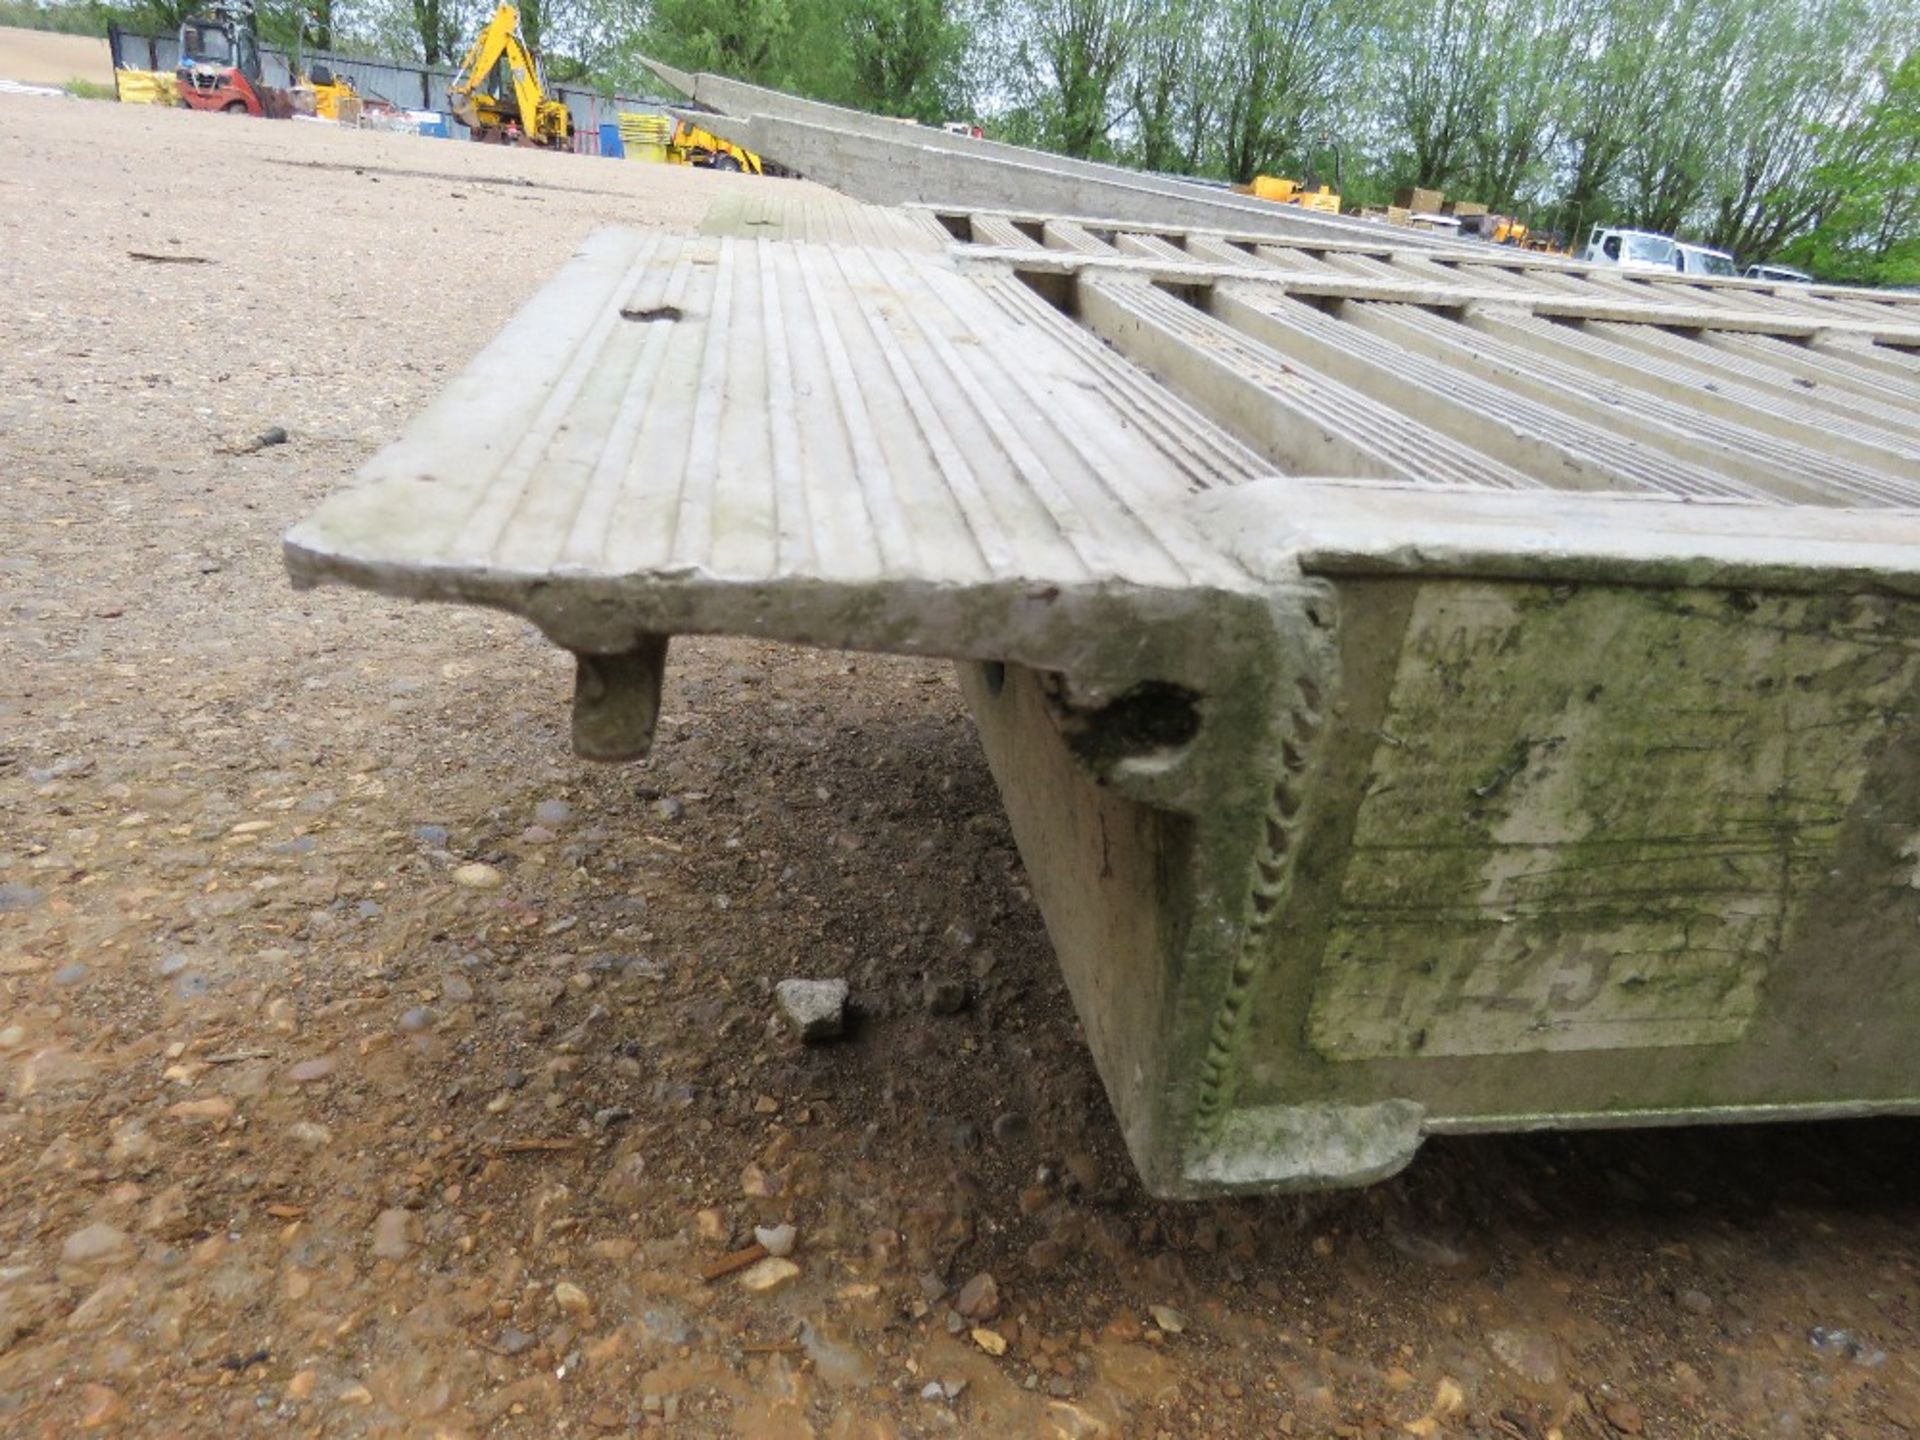 LARGE PAIR OF ALUMINIUM LOADING RAMPS 10FT LENGTH APPROX X 16" WIDTH APPROX. - Image 5 of 6